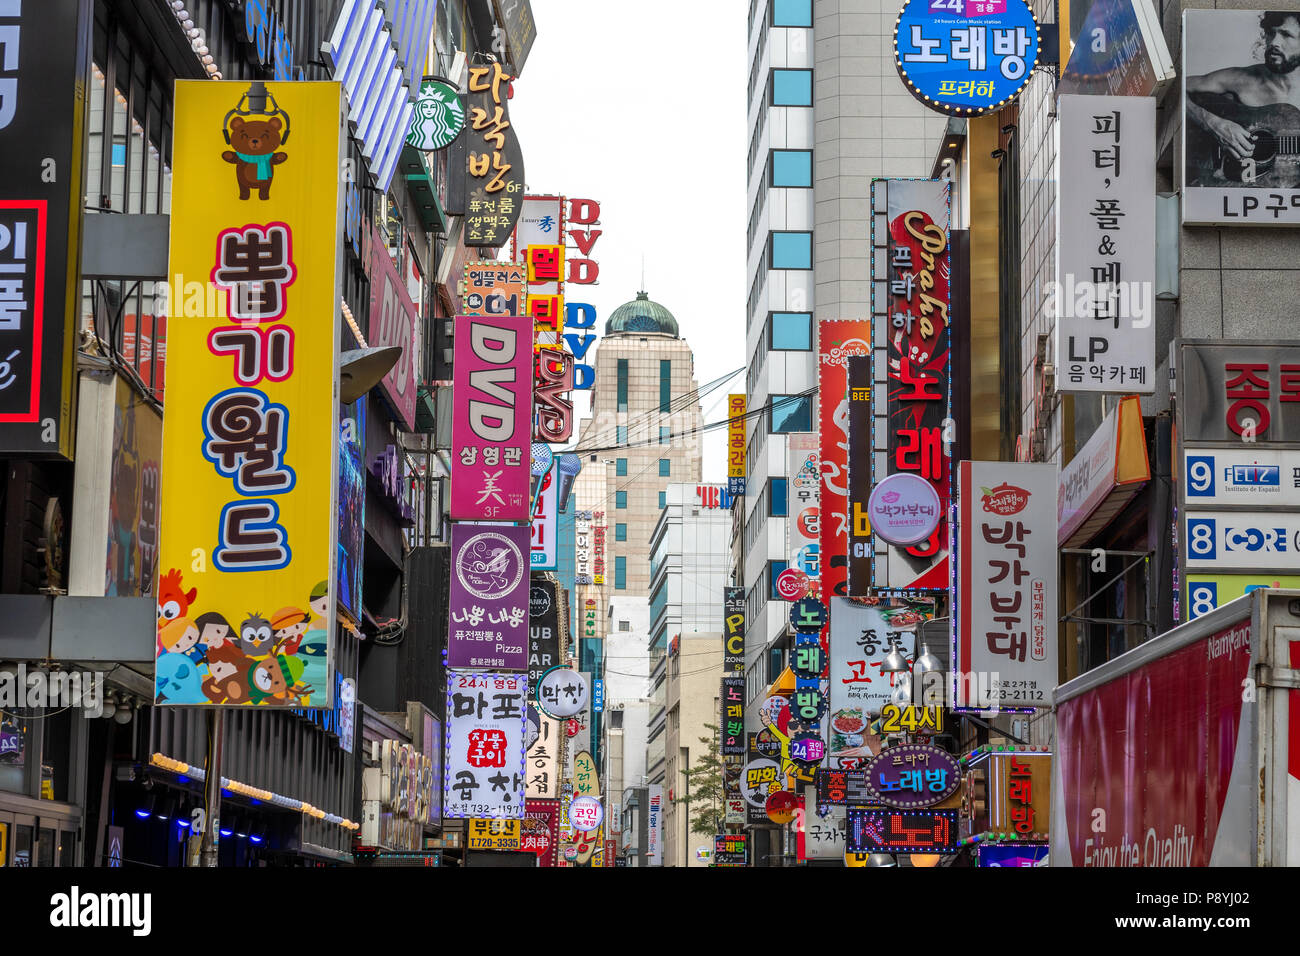 Signs above shops in Myeong-Dong, Seoul, South Korea Stock Photo